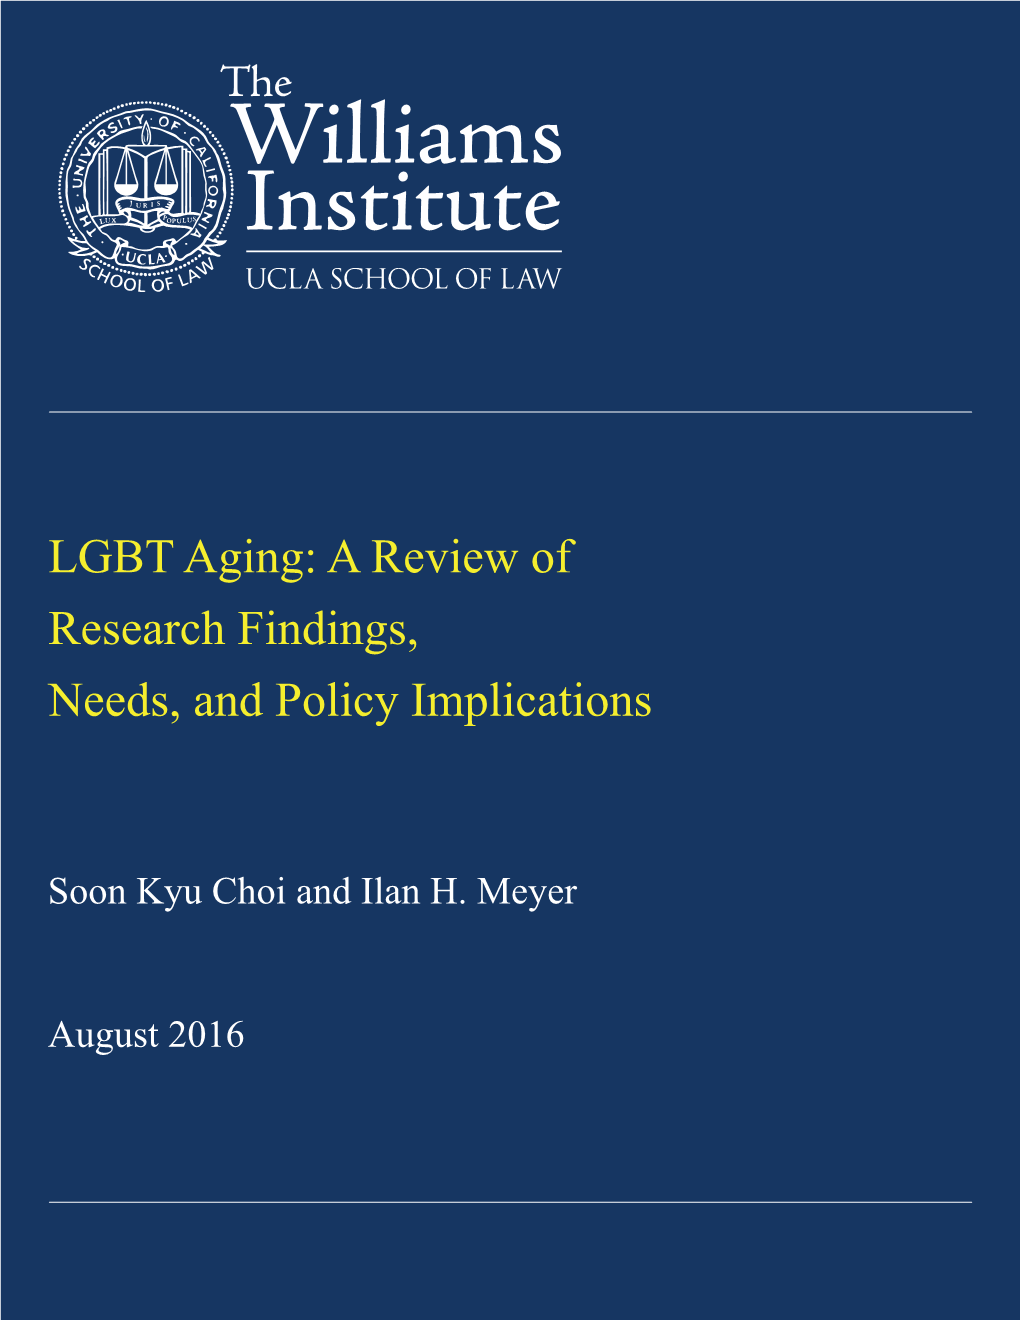 LGBT Aging: a Review of Research Findings, Needs, and Policy Implications